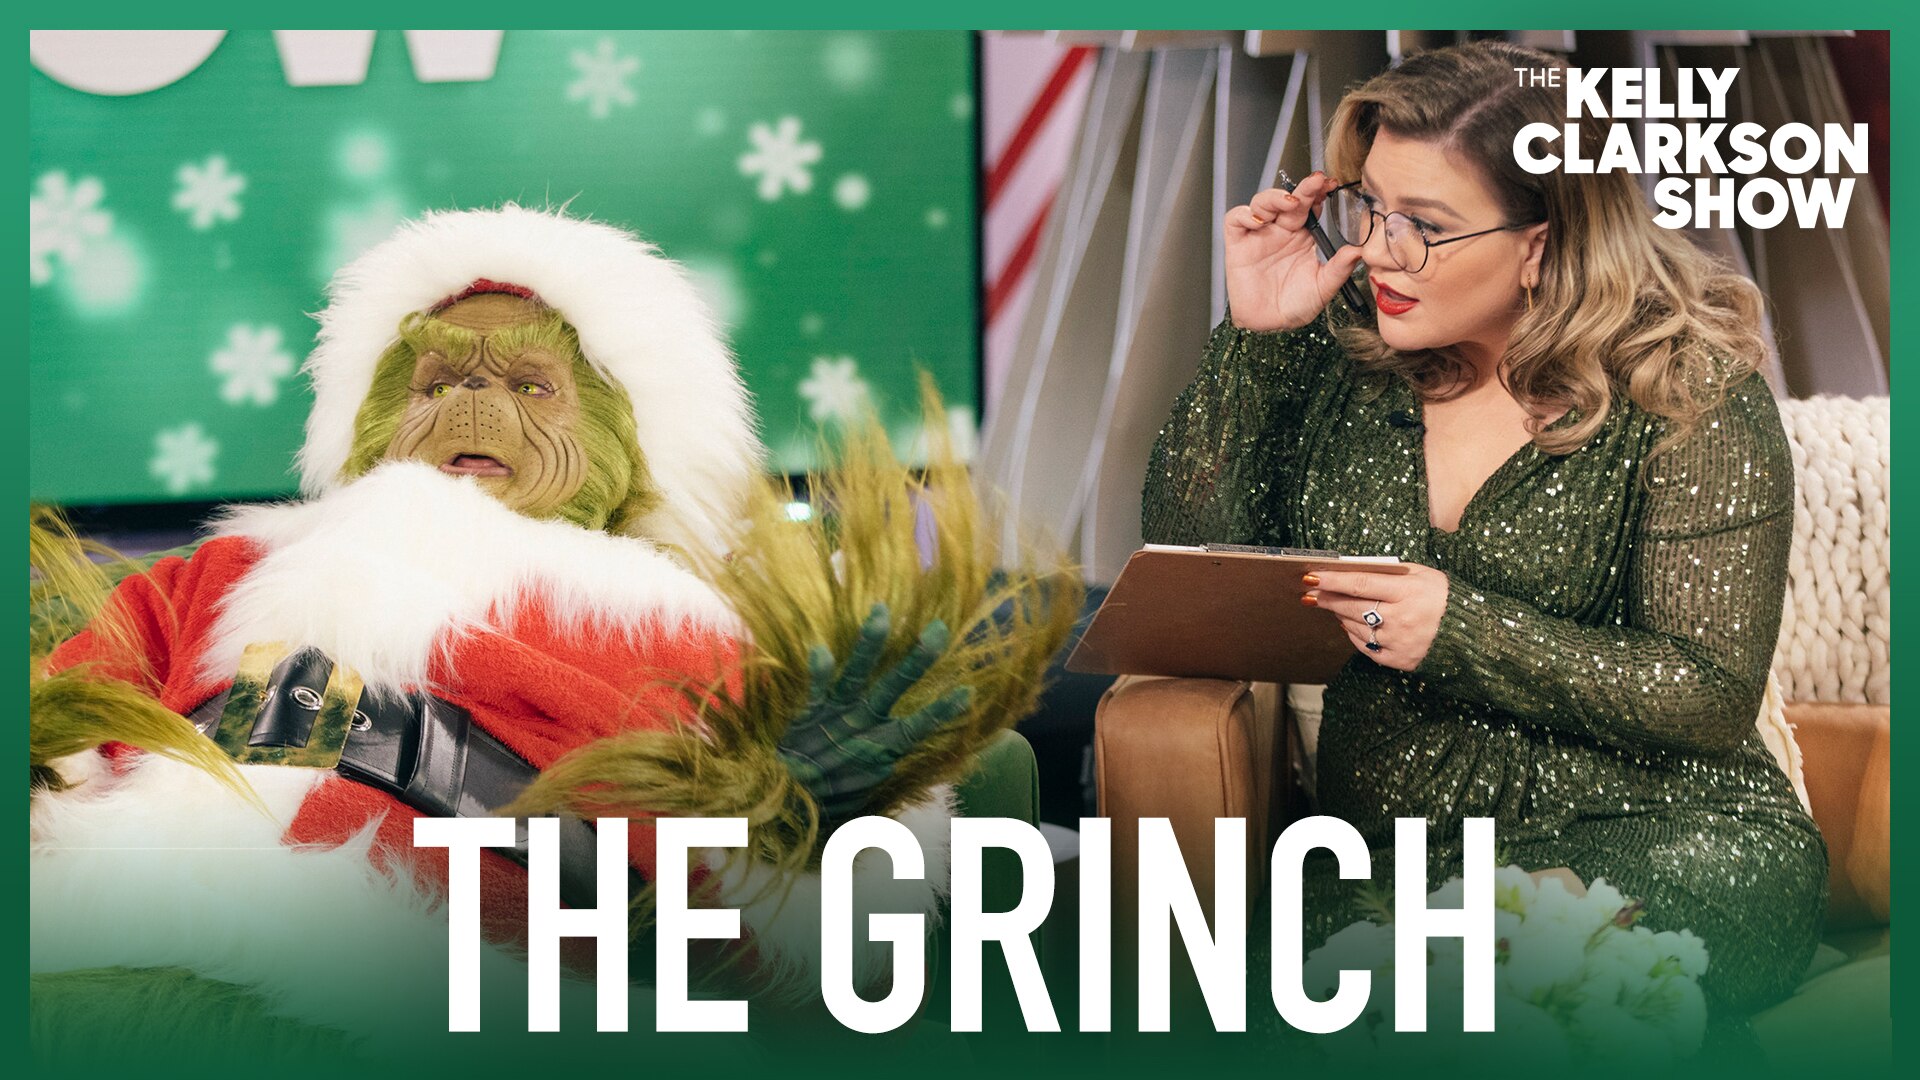 Watch The Kelly Clarkson Show Official Website Highlight The Grinch 